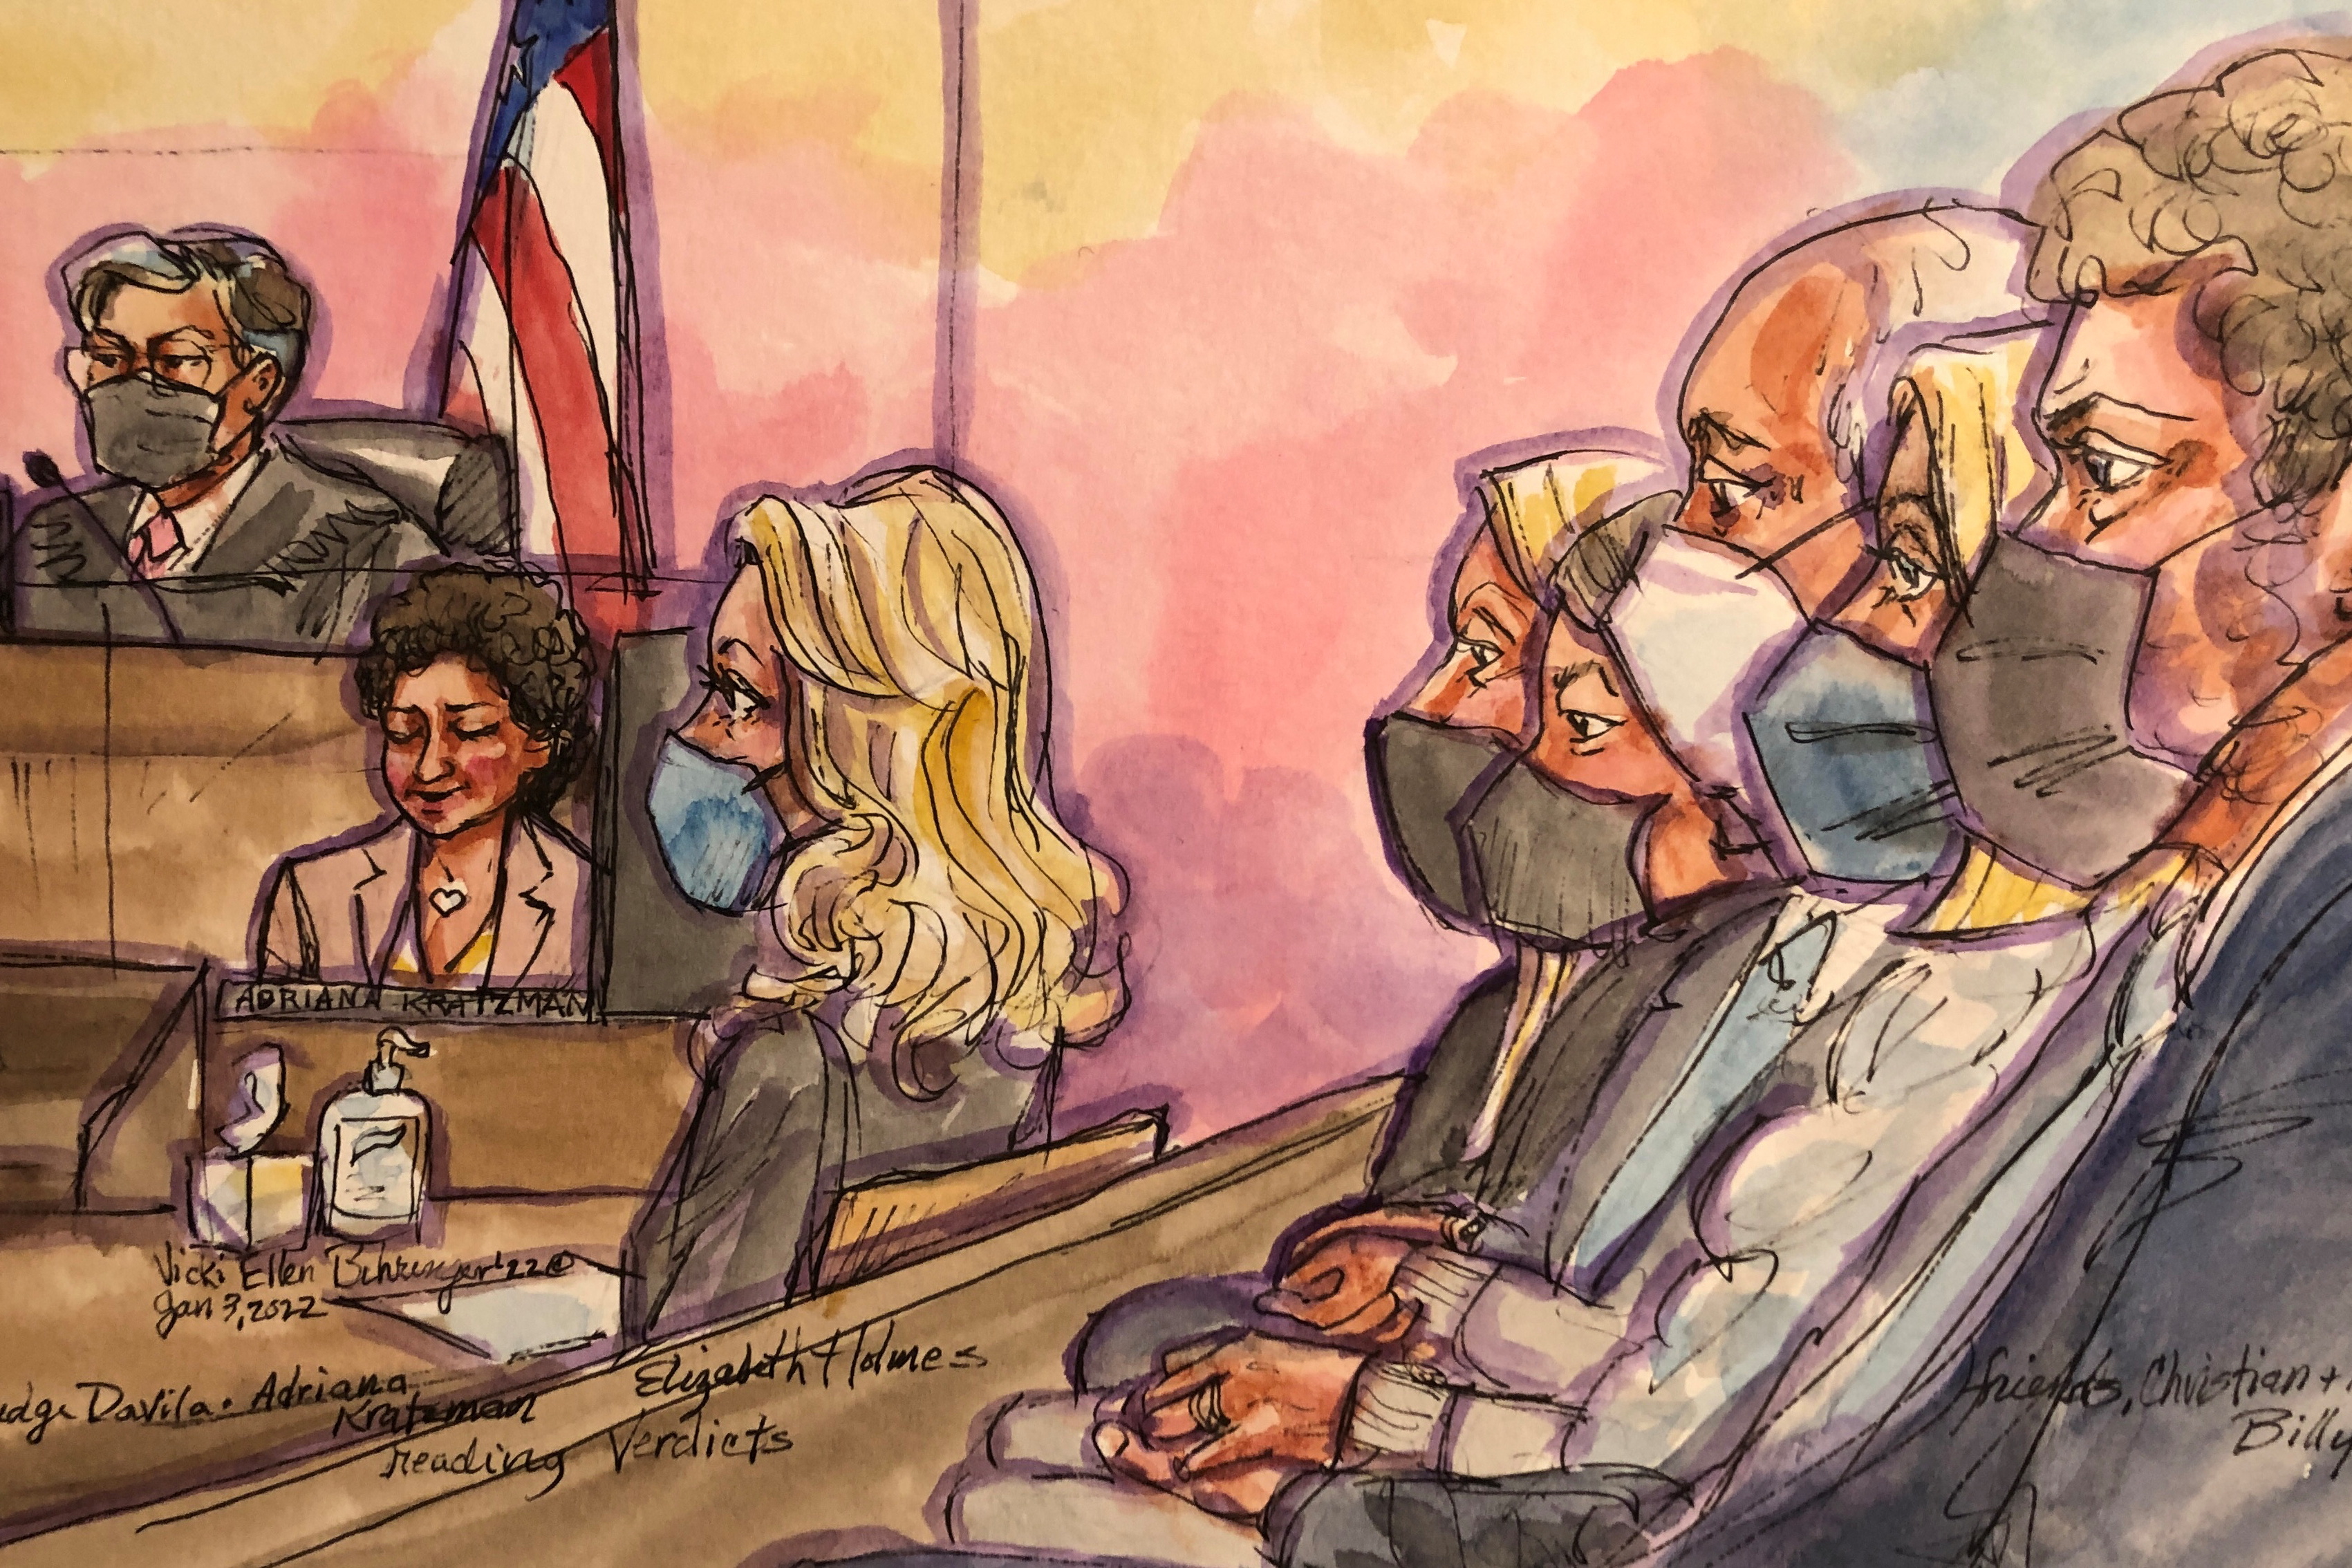 Theranos founder Elizabeth Holmes listens and her family hold hands as the court clerk reads before Judge Edward Davila that she was found guilty on four of 11 counts in her fraud trial at Robert F. Peckham U.S. Courthouse in San Jose, California, U.S., January 3, 2022 in this courtroom sketch. REUTERS/Vicki Behringer